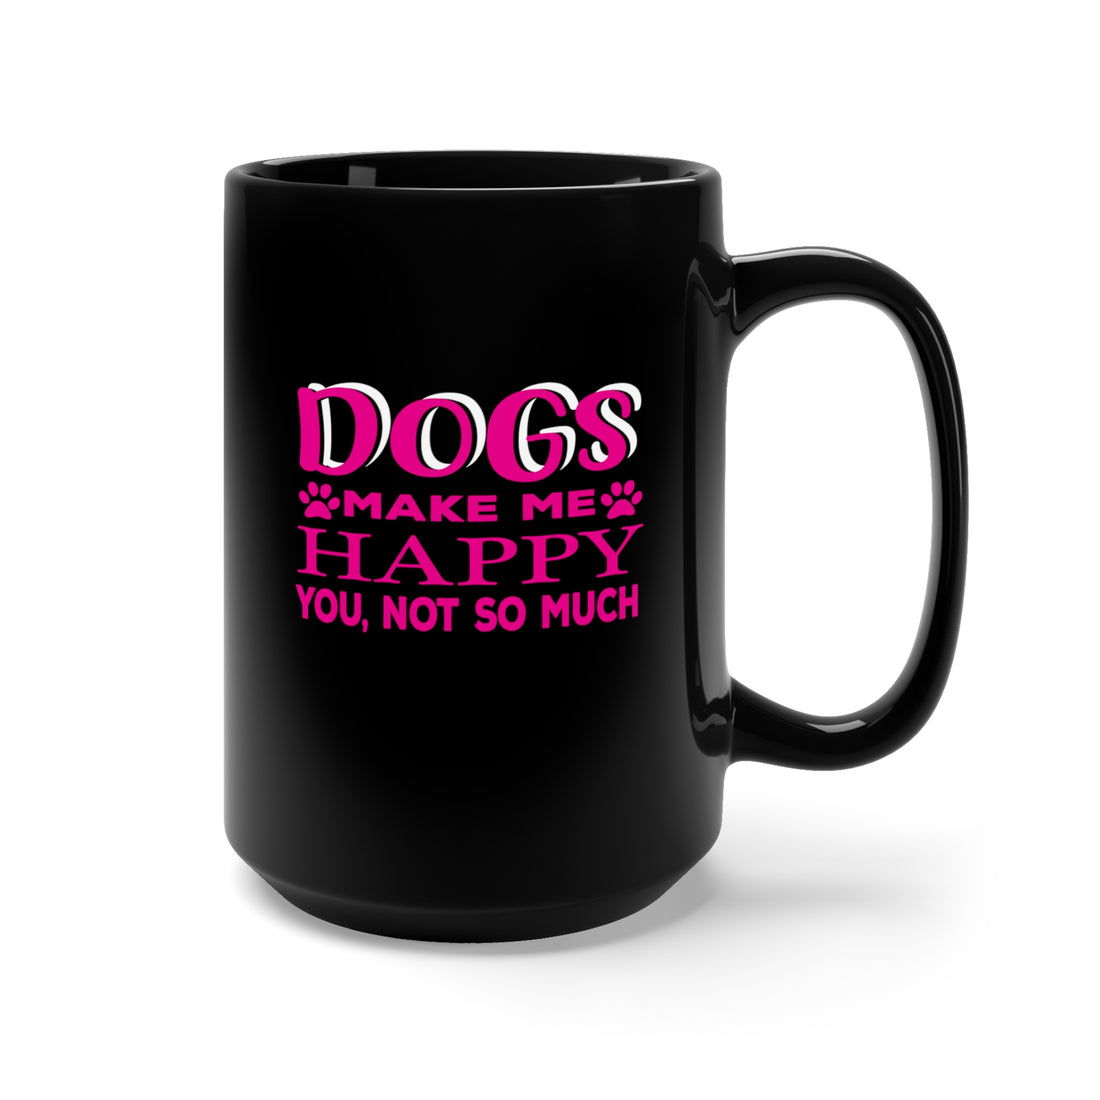 Dogs Make Me Happy You Not So Much - Large 15oz Black Mug